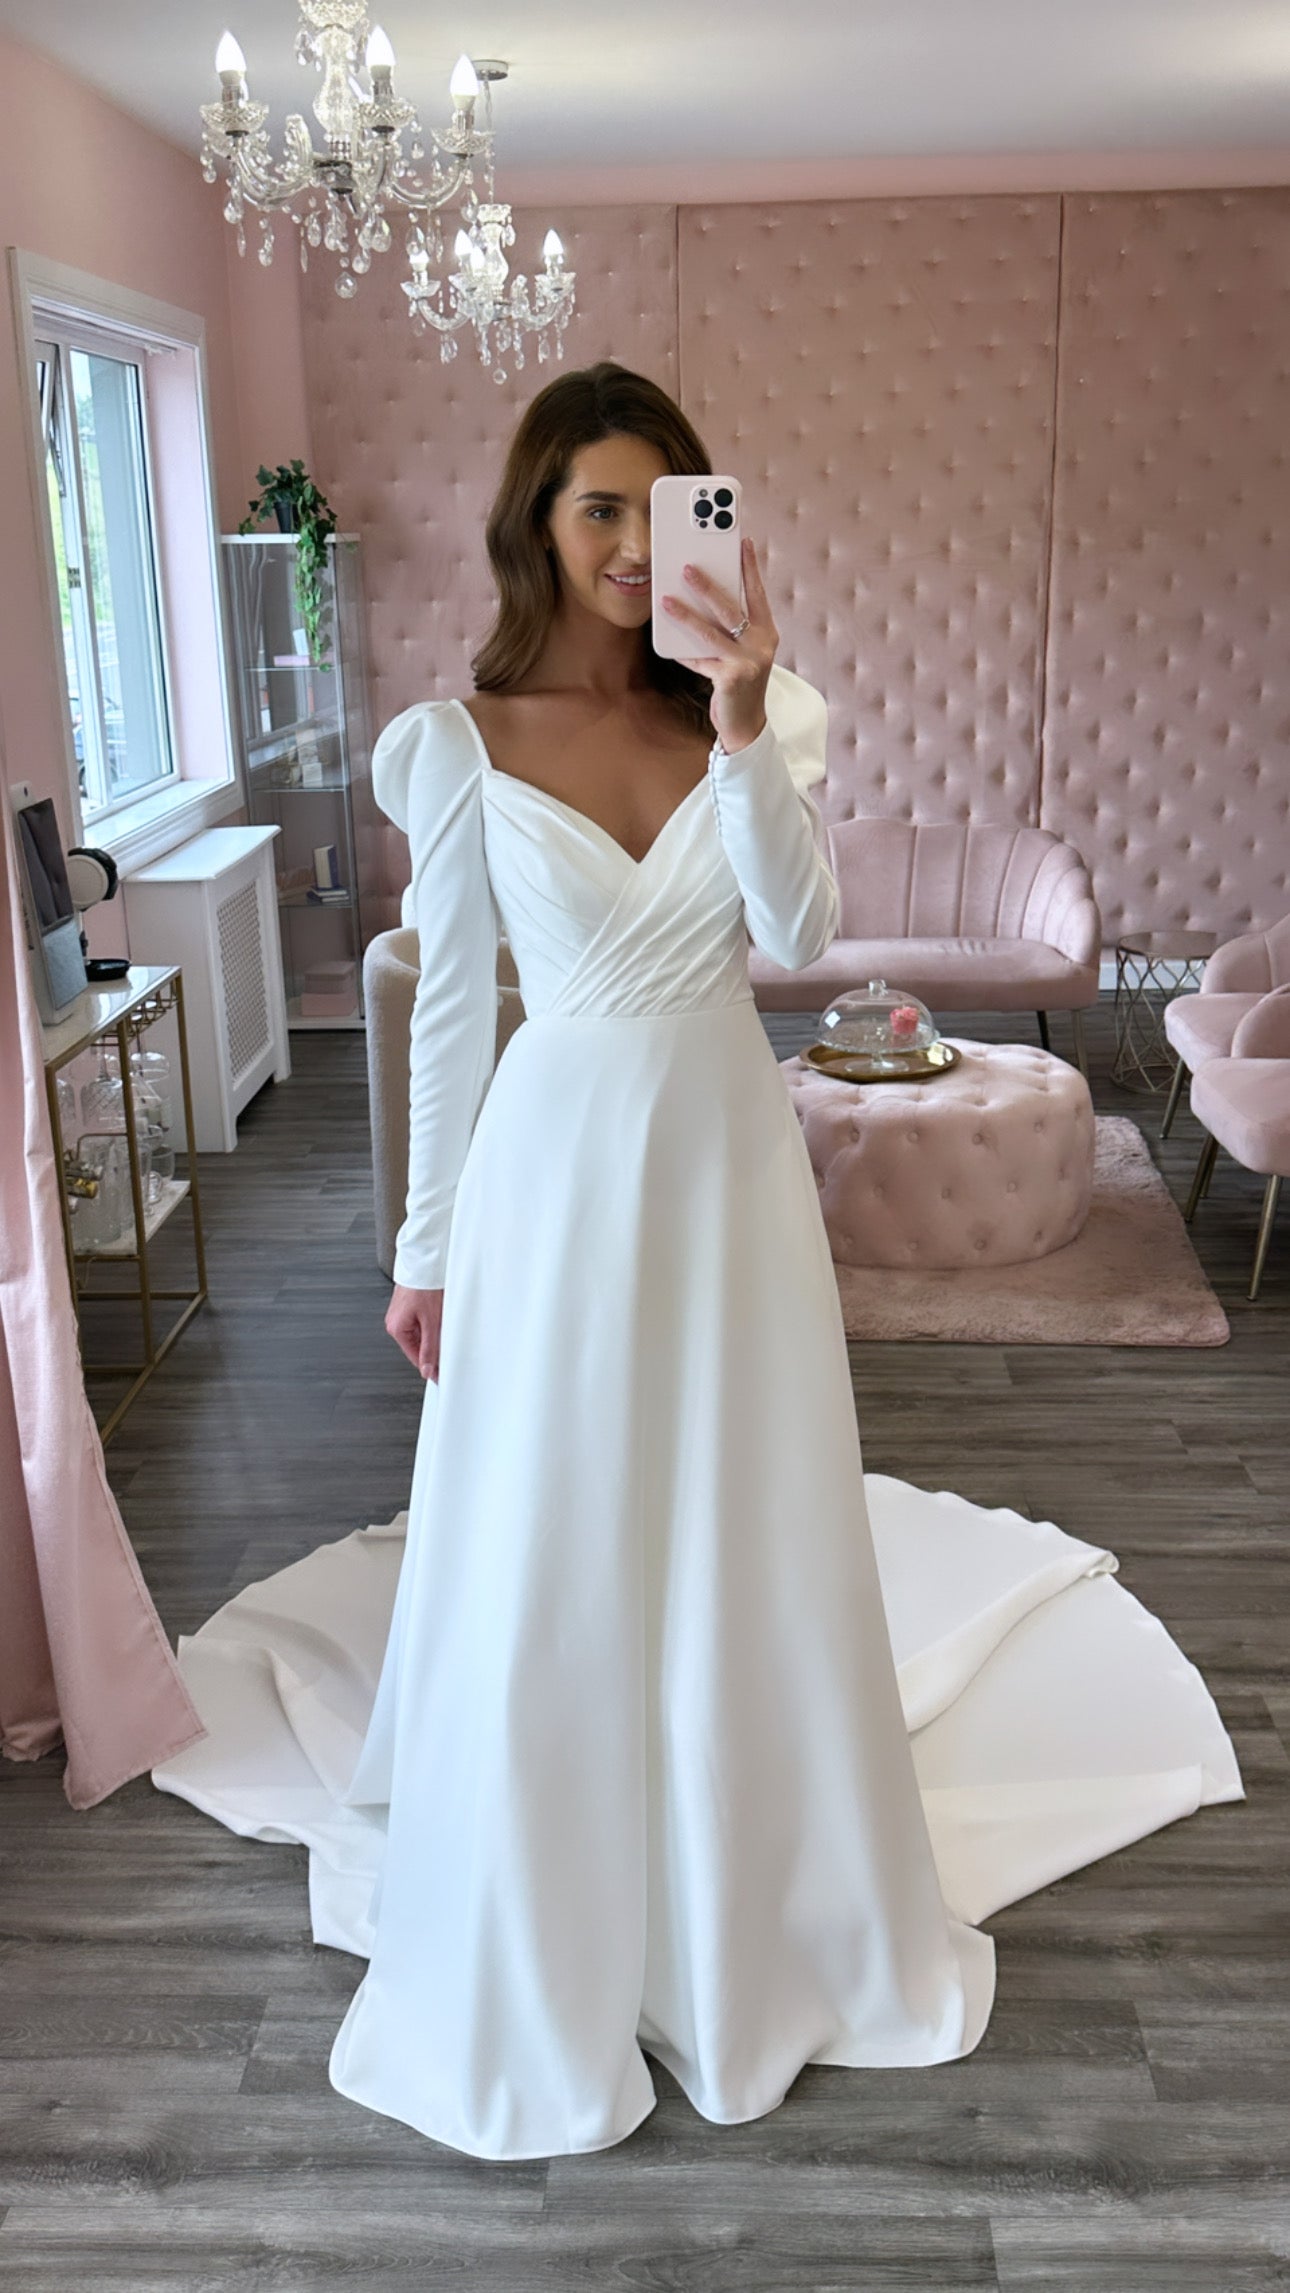 Plus size wedding dress with elegant puff sleeves and a-line skirt